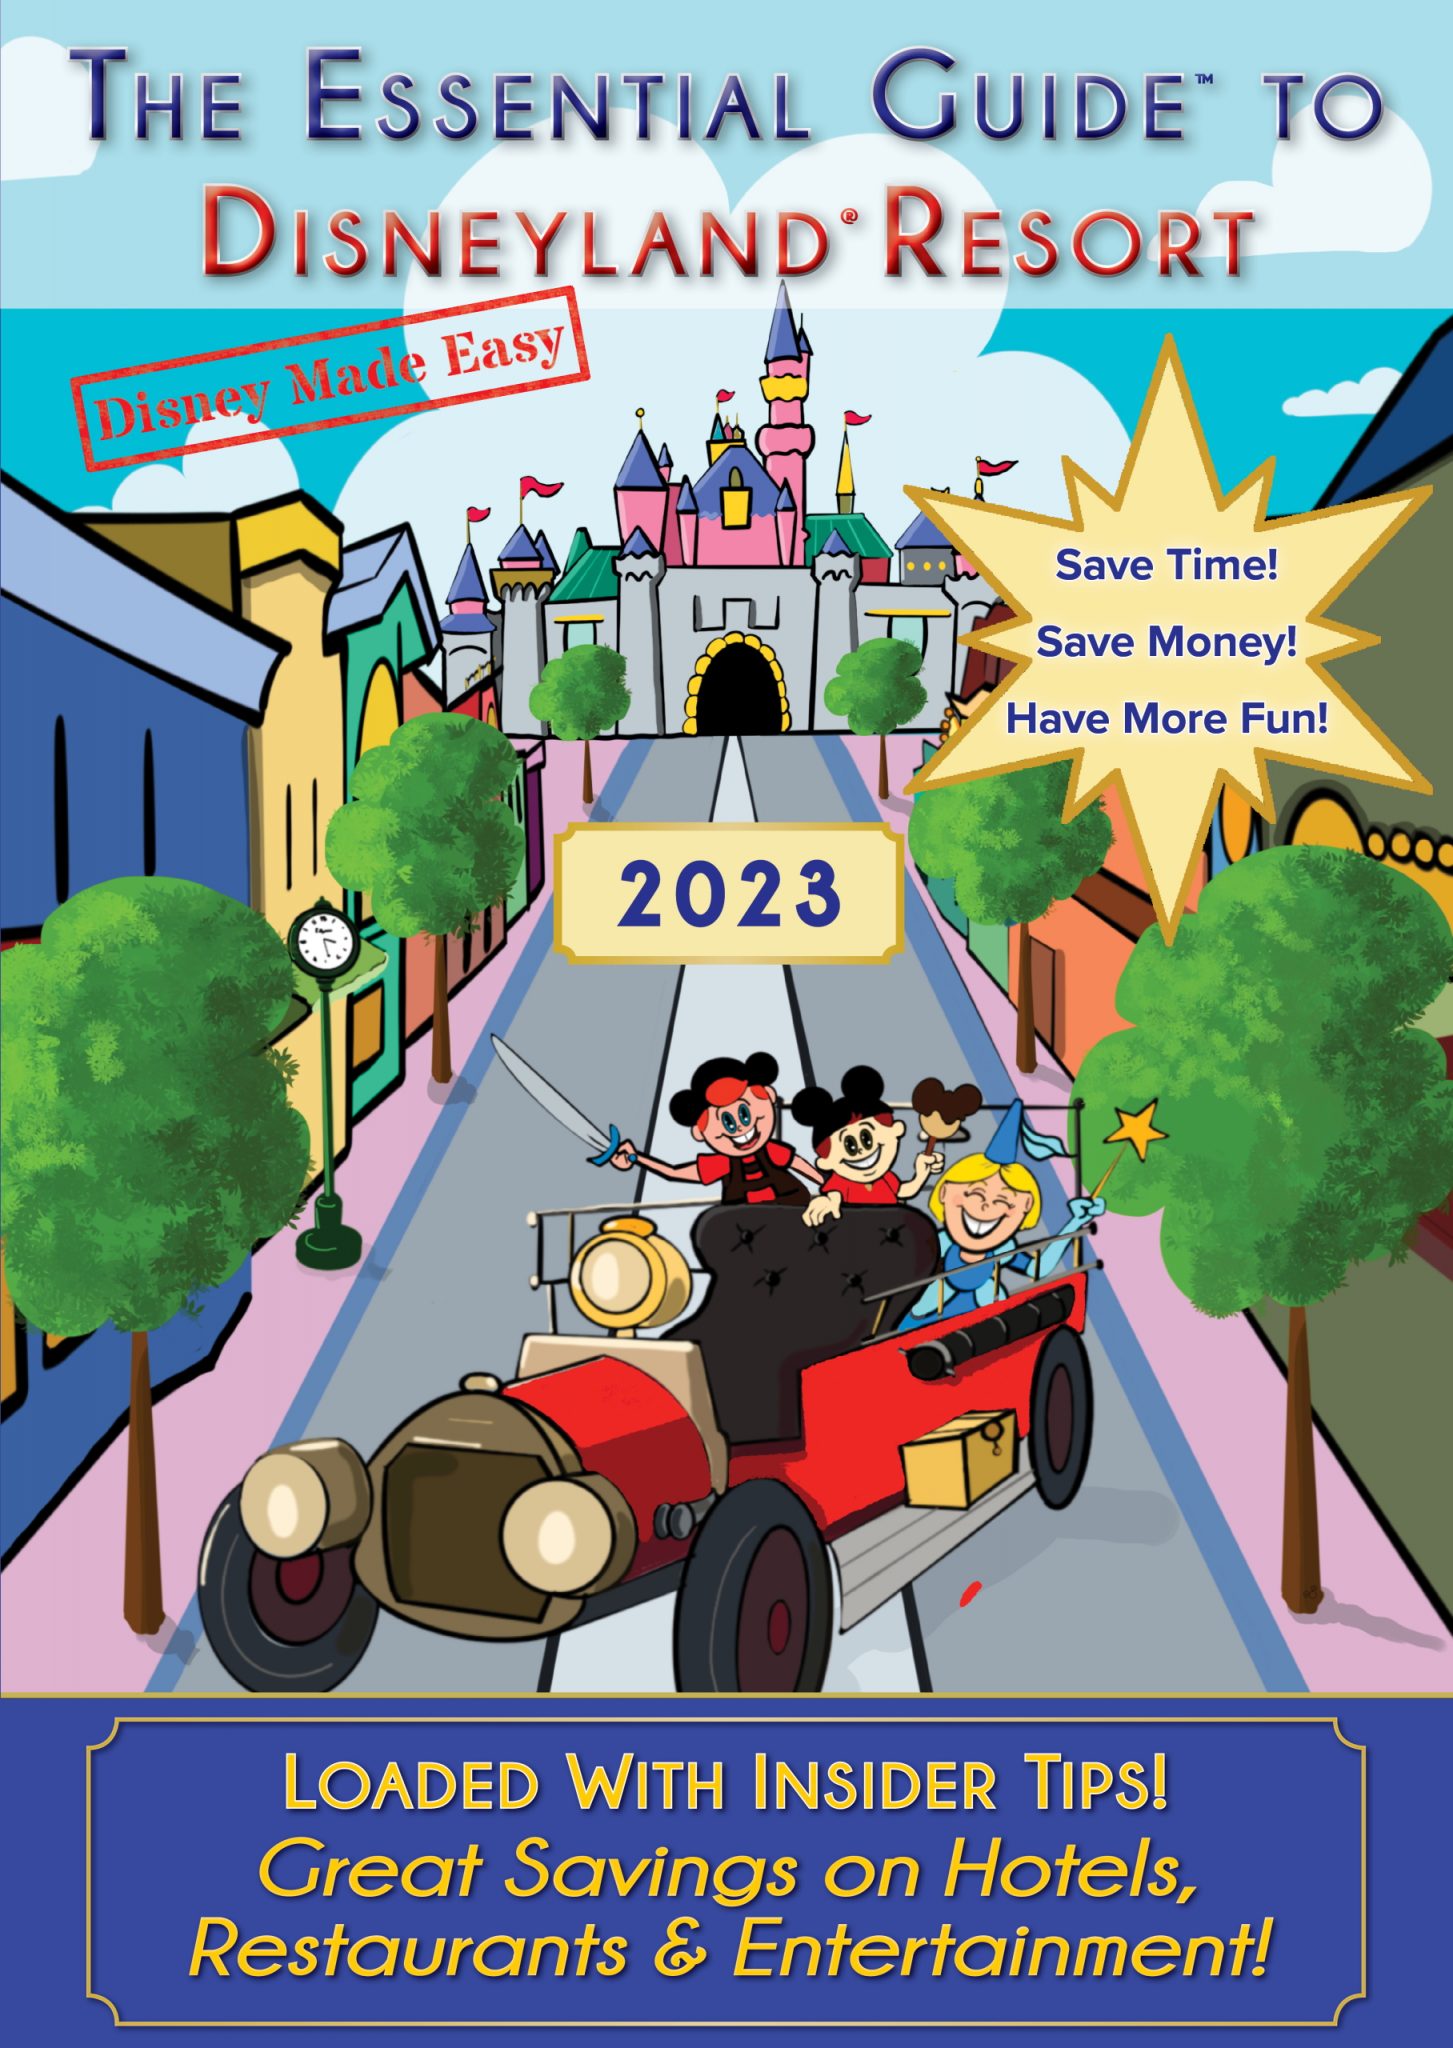 The Essential Guide to Disneyland New for 2023! Travel Made Easy